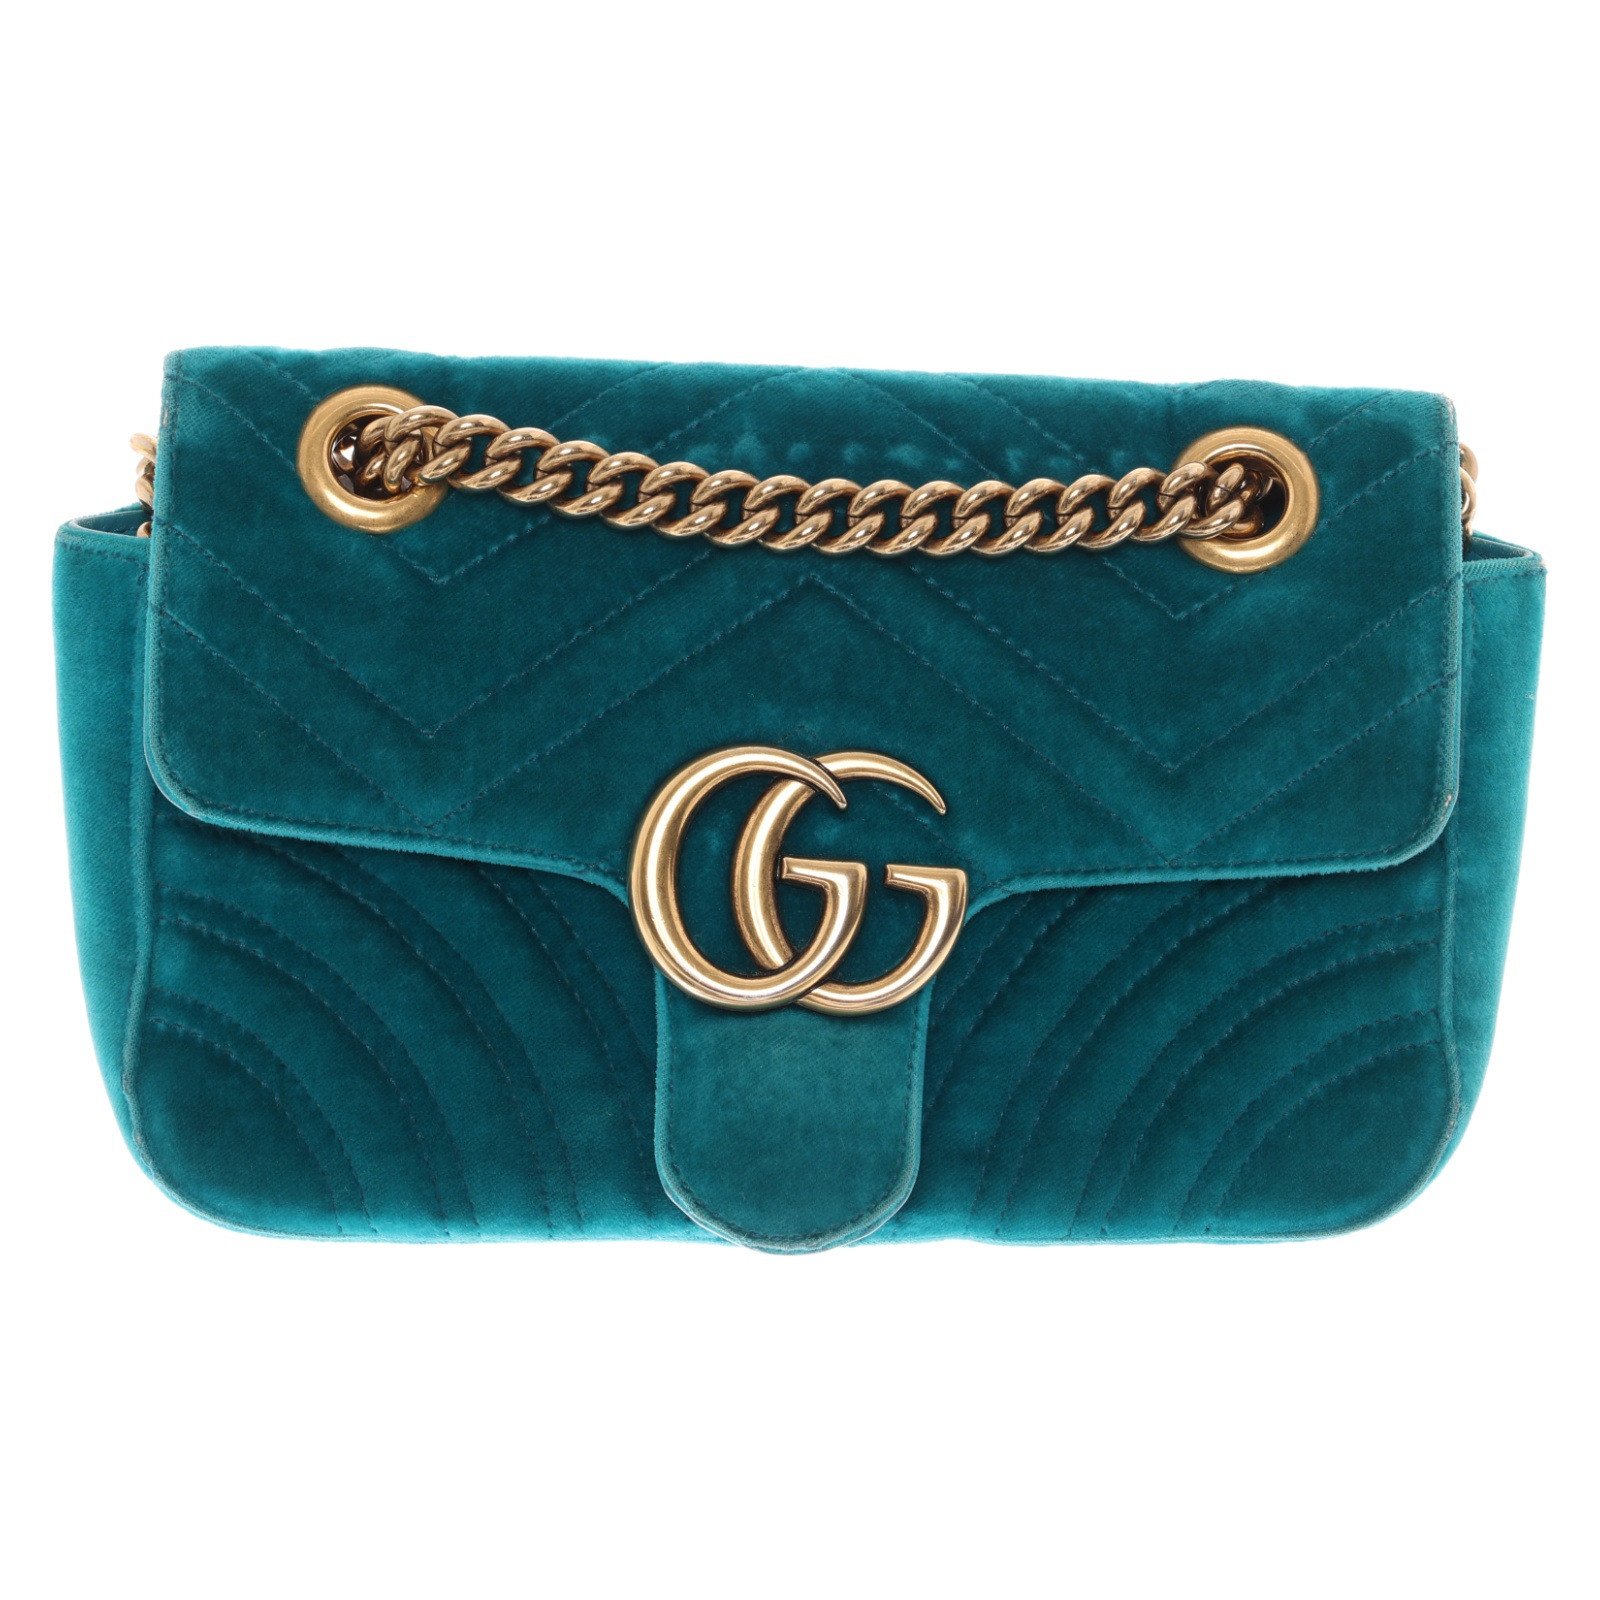 GG Marmont Flap Bag Small in Turquoise